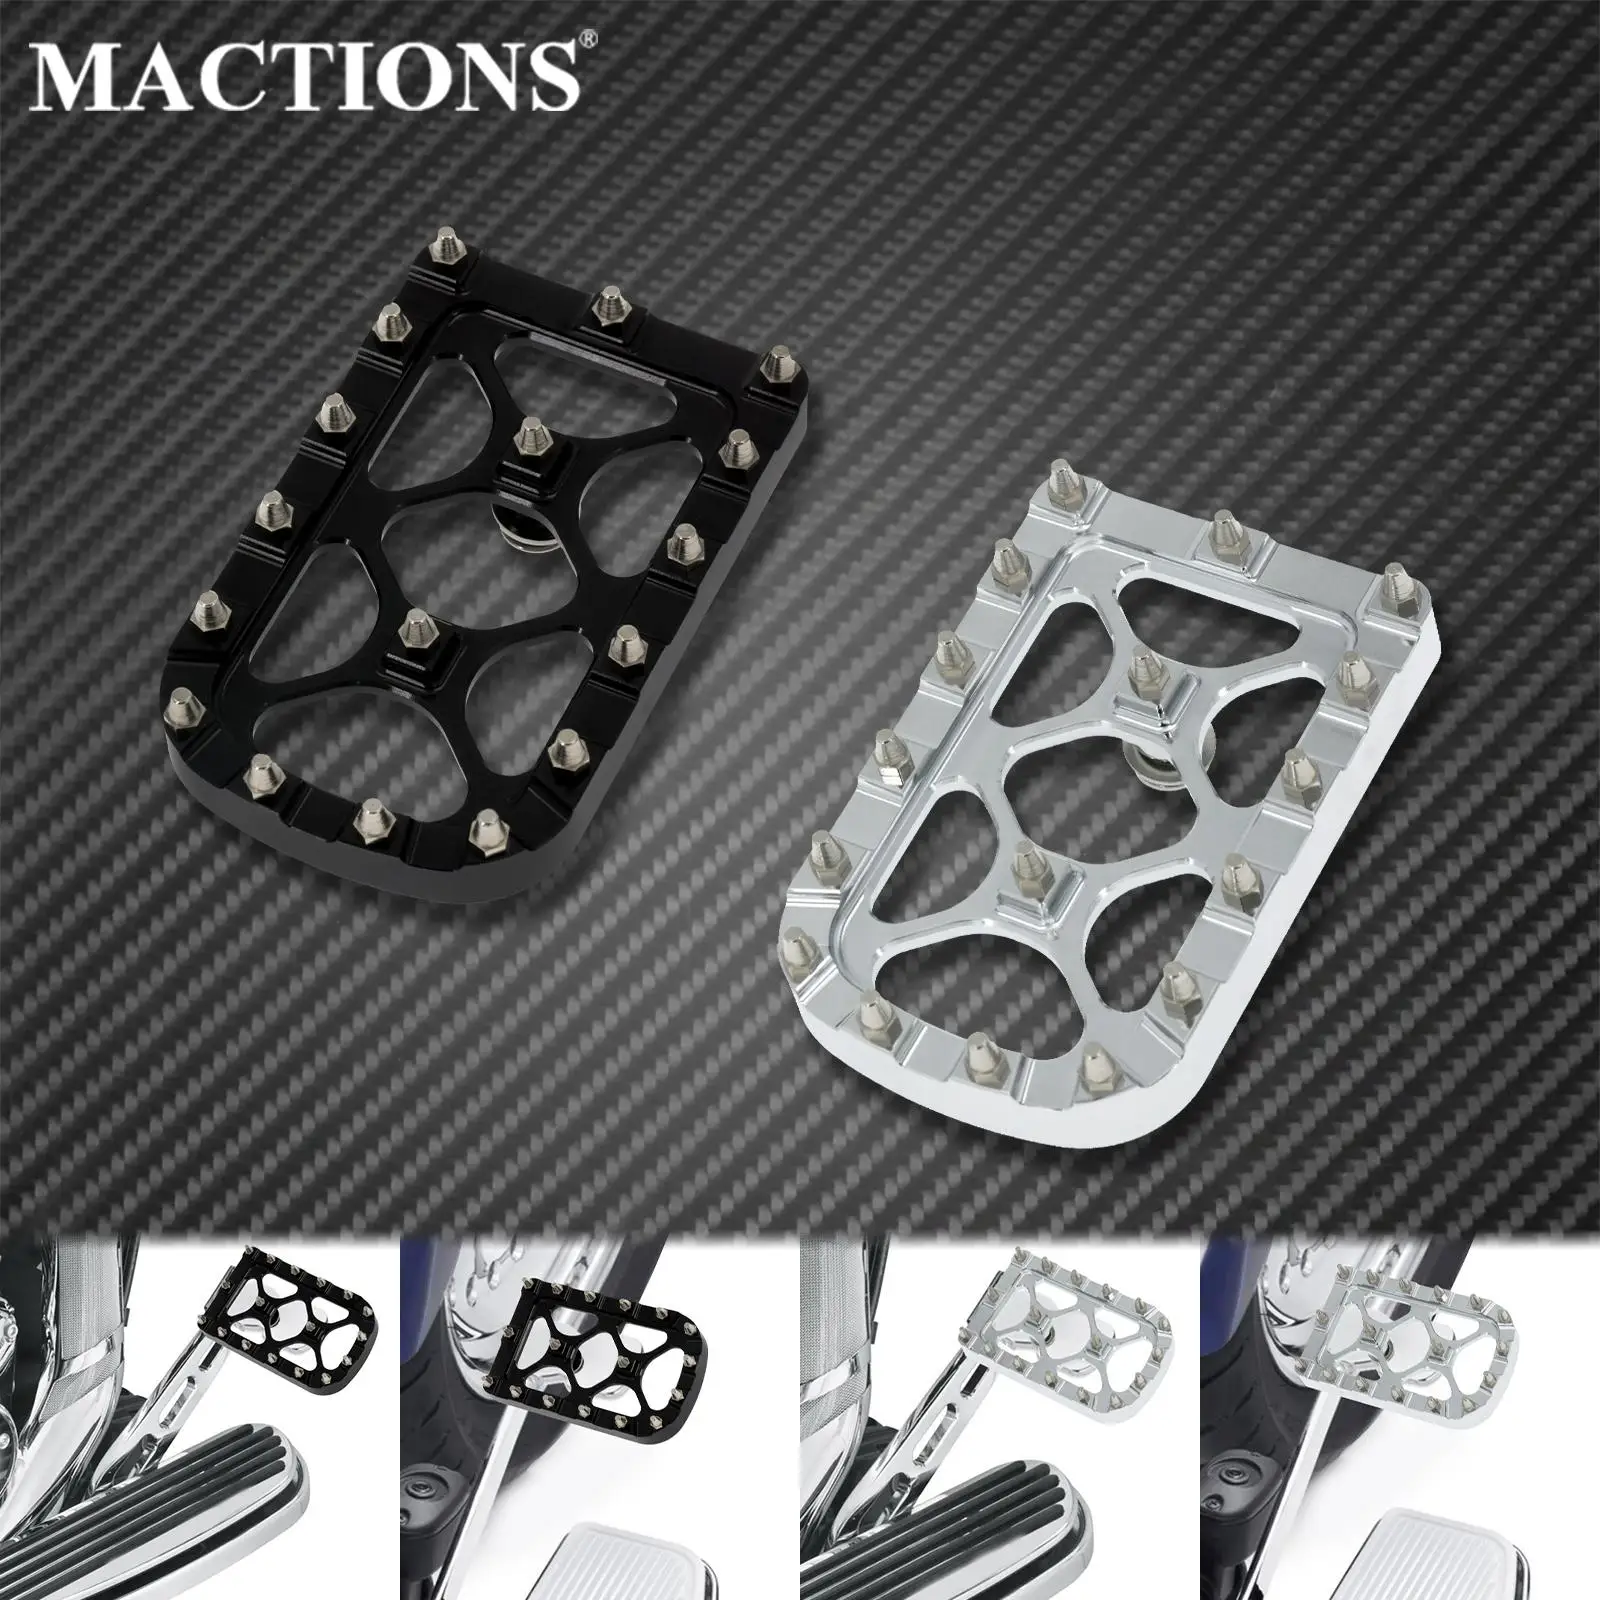 

Motorcycle CNC Foot Pegs Footrest Brake Pedal Large Pad Cover For Harley Softail FL Touring Street Road Glide Dyna Fat Boy FLD